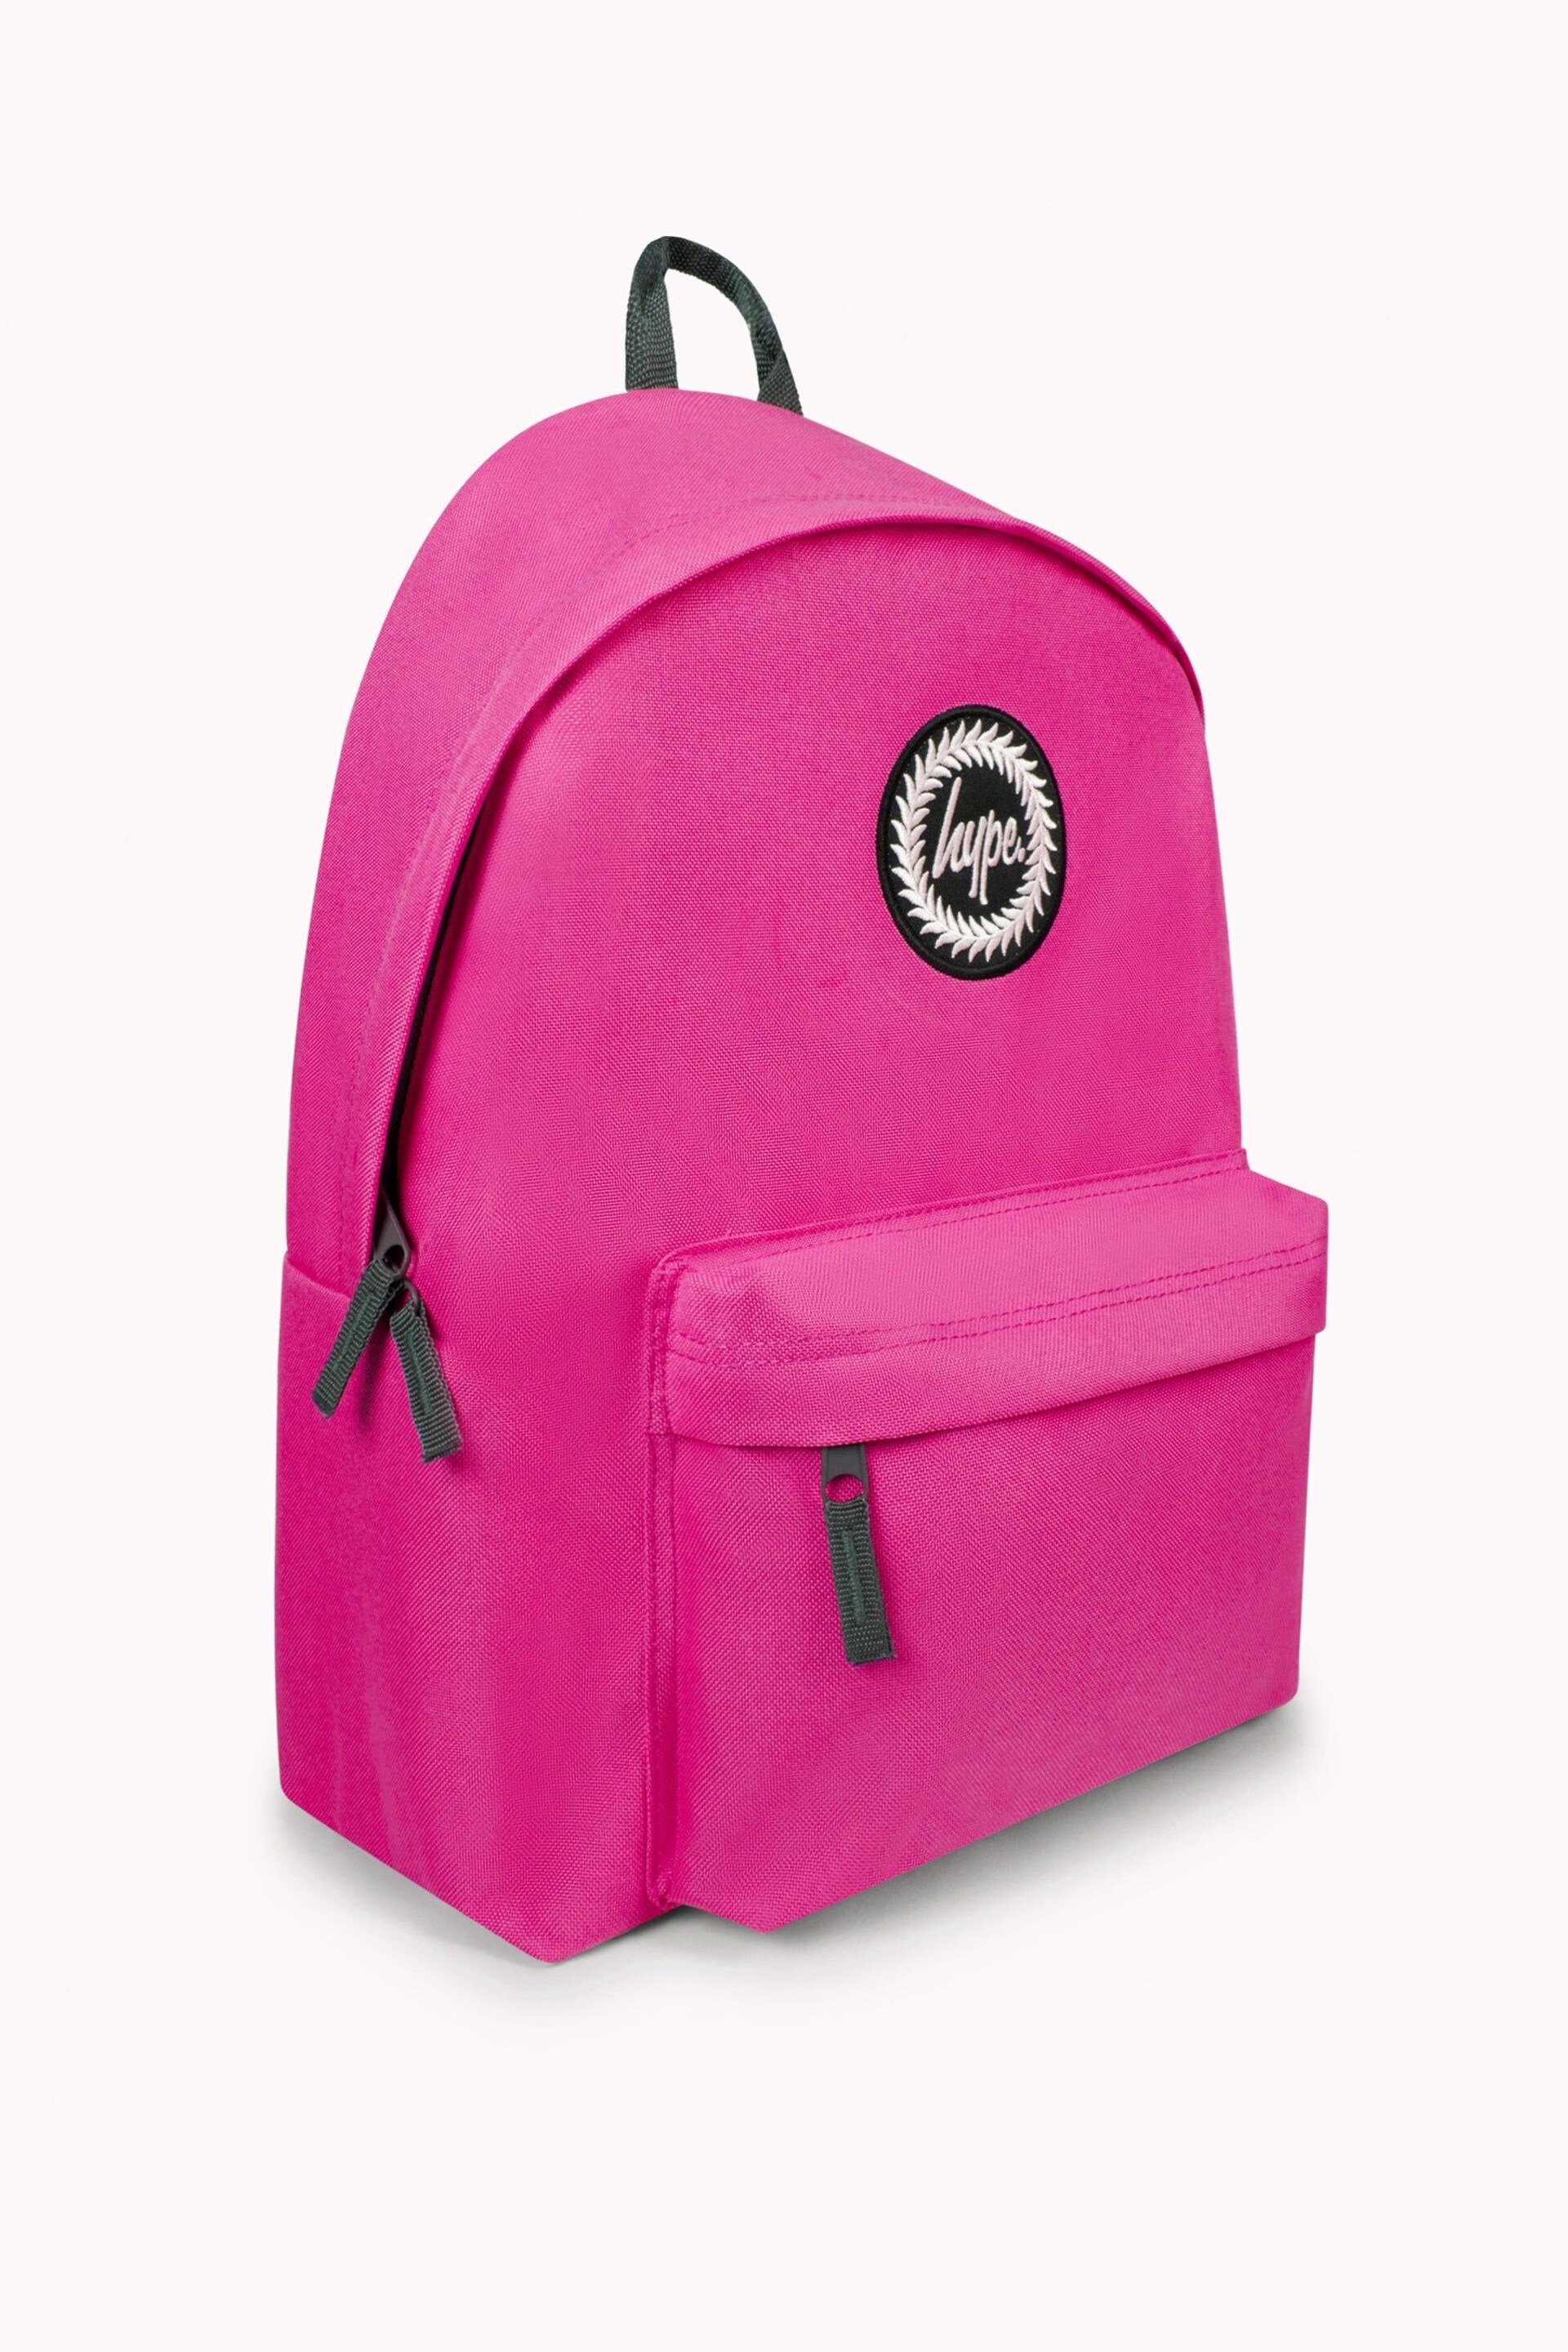 Hype. Iconic Backpack - Image 2 of 6